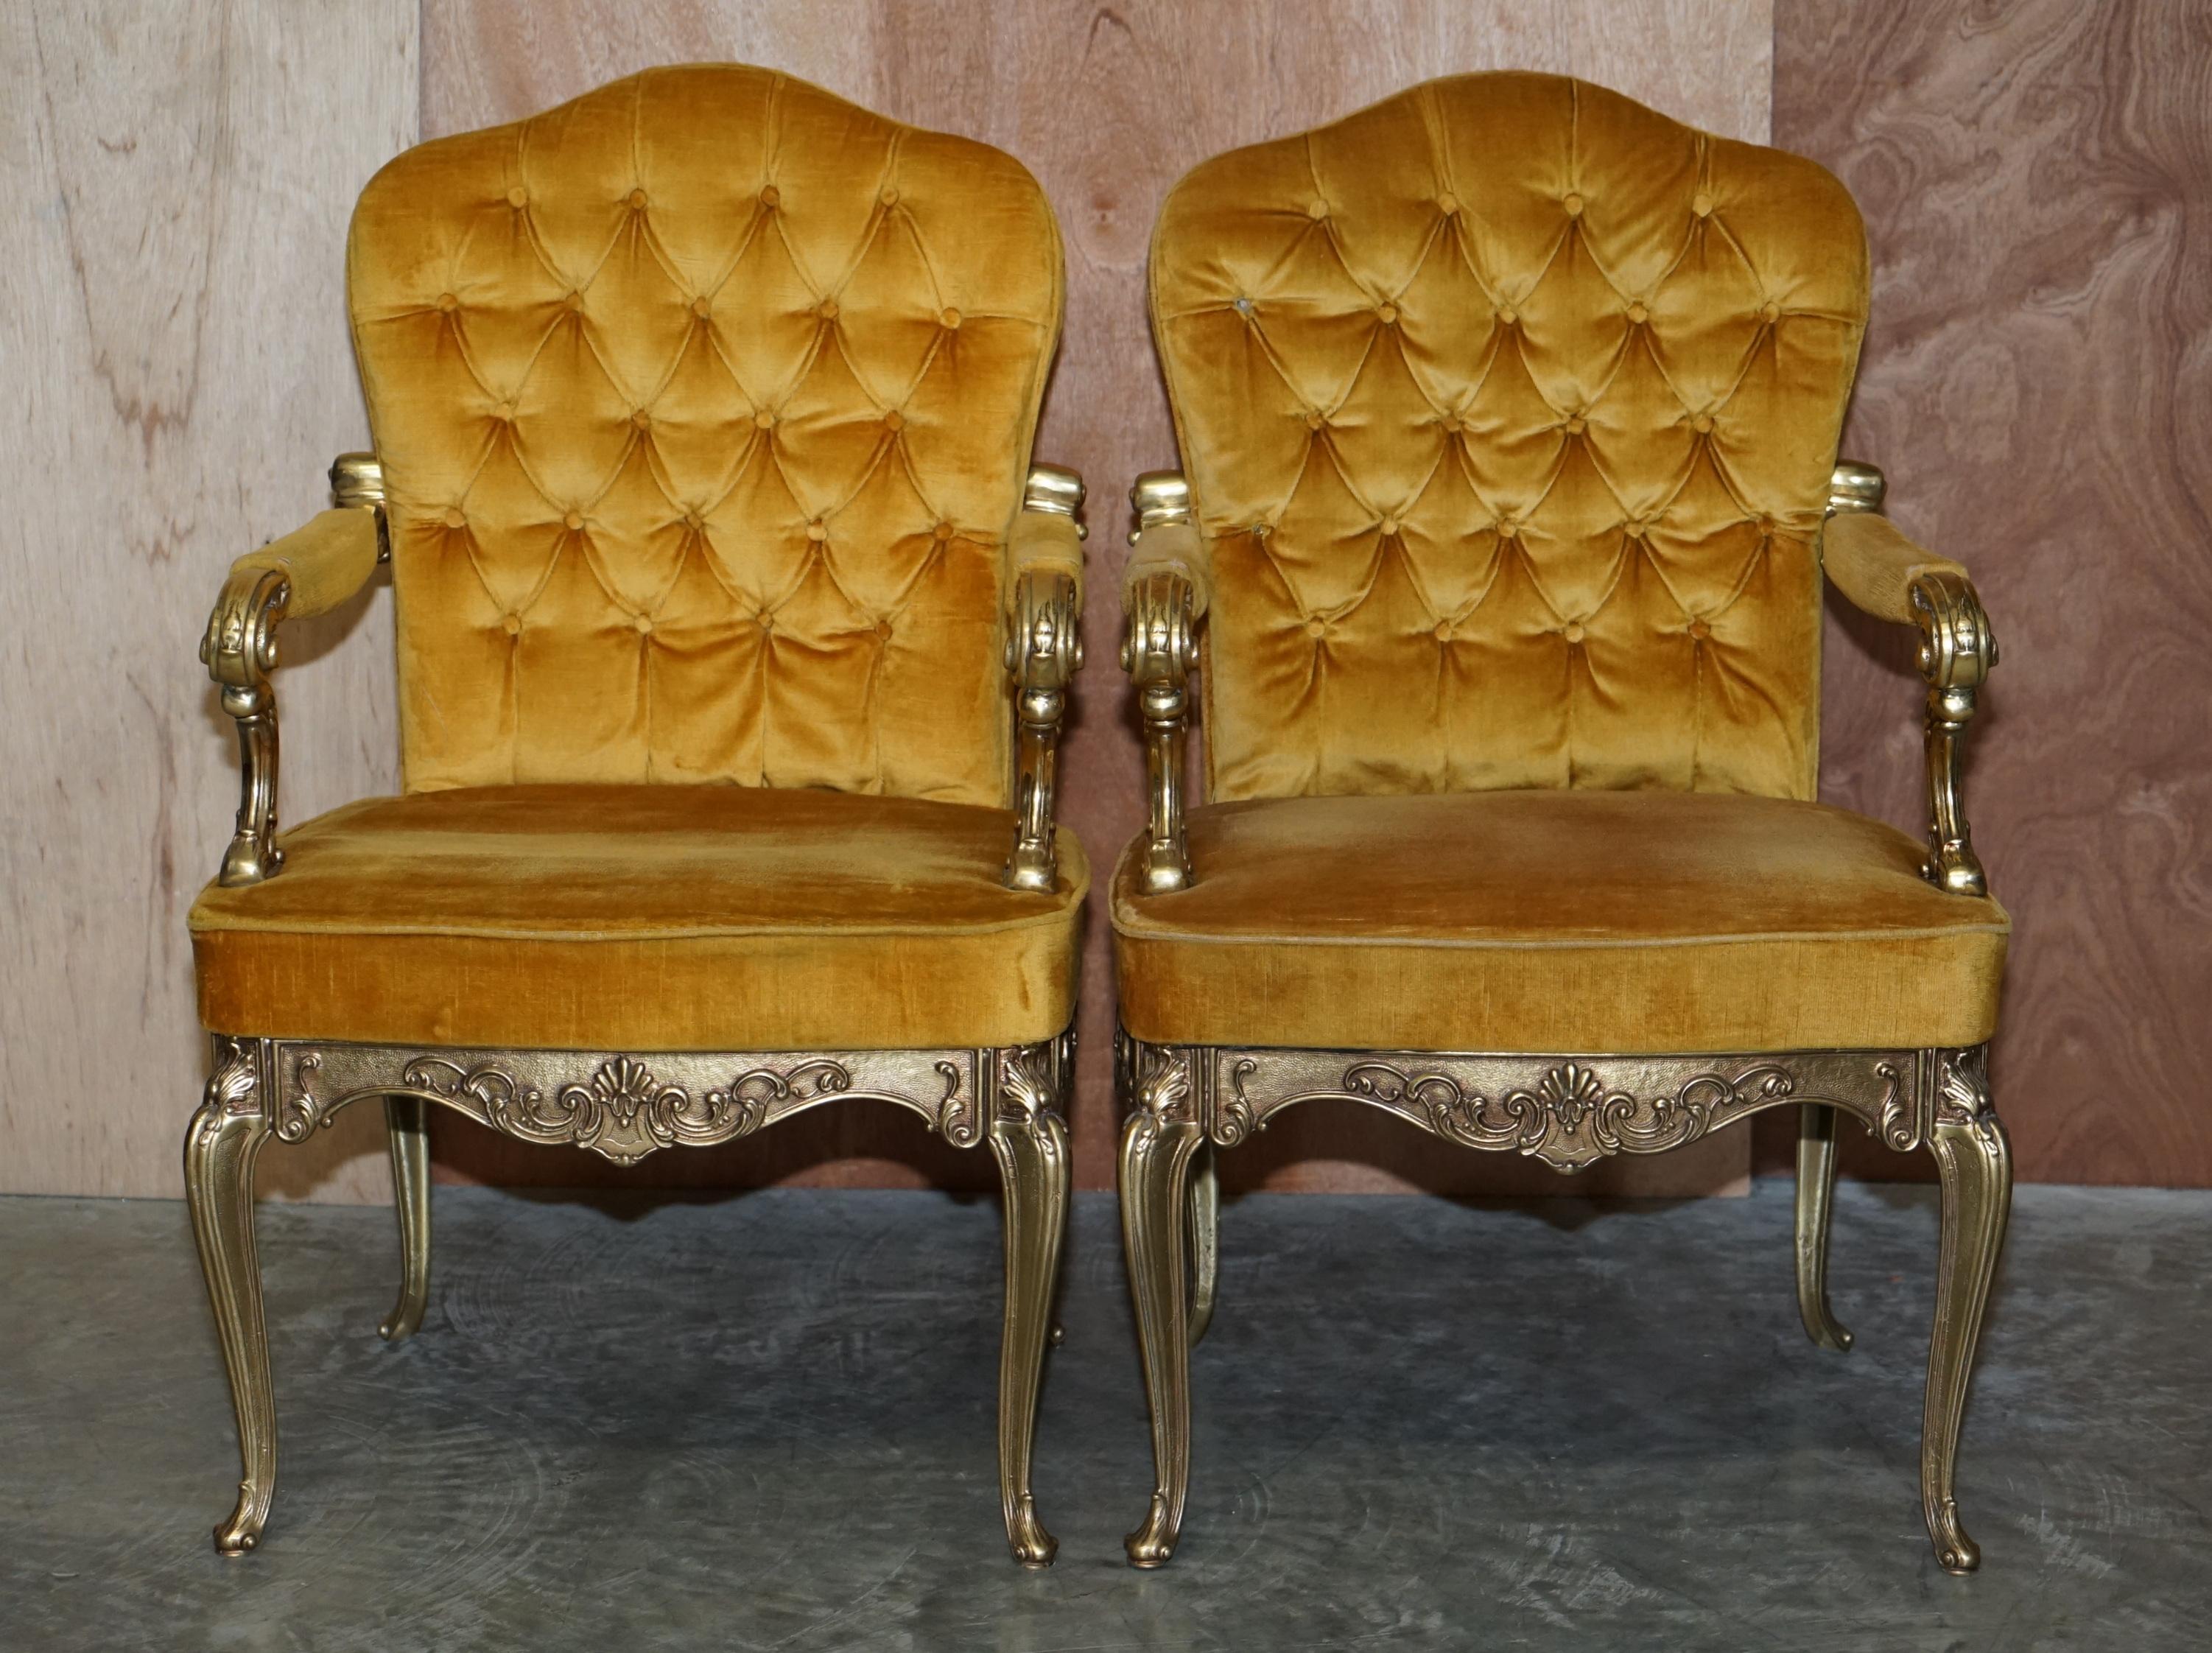 We are delighted to offer for sale this stunning, collectable pair of original Hollywood Regency brass chairs made by and stamped Orsenigo Italy

A very good looking and decorative pair with ornate brass frames which have been beautifully cast all